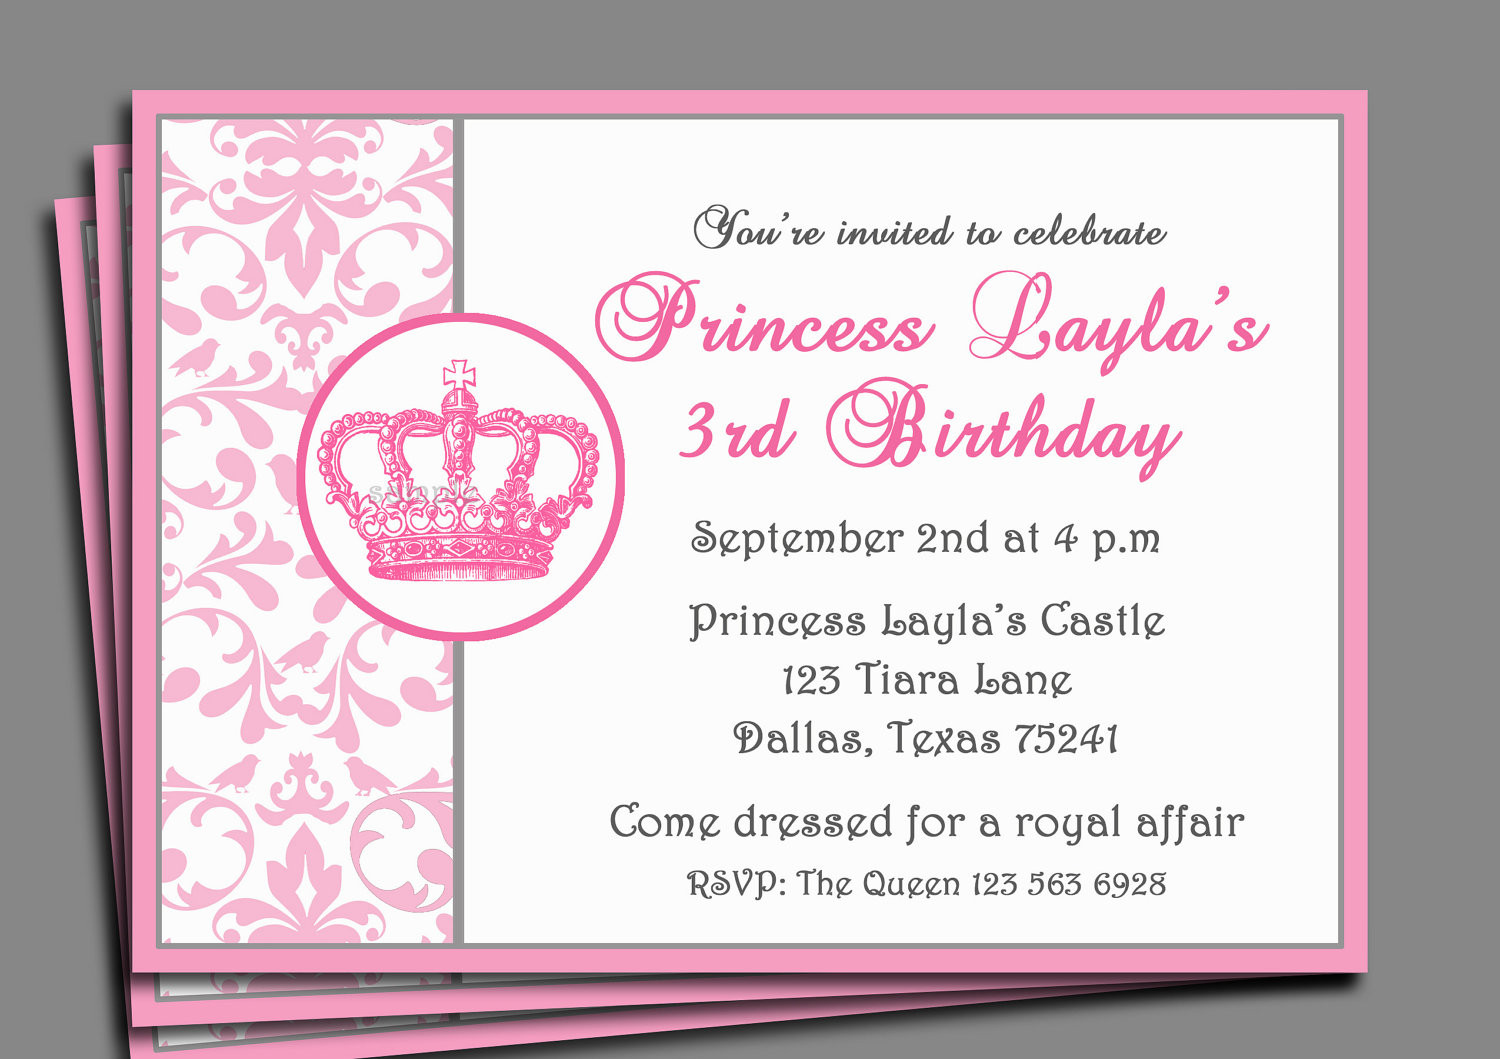 Best Princess Birthday Party Invitations from Princess Party Invitation Pri...